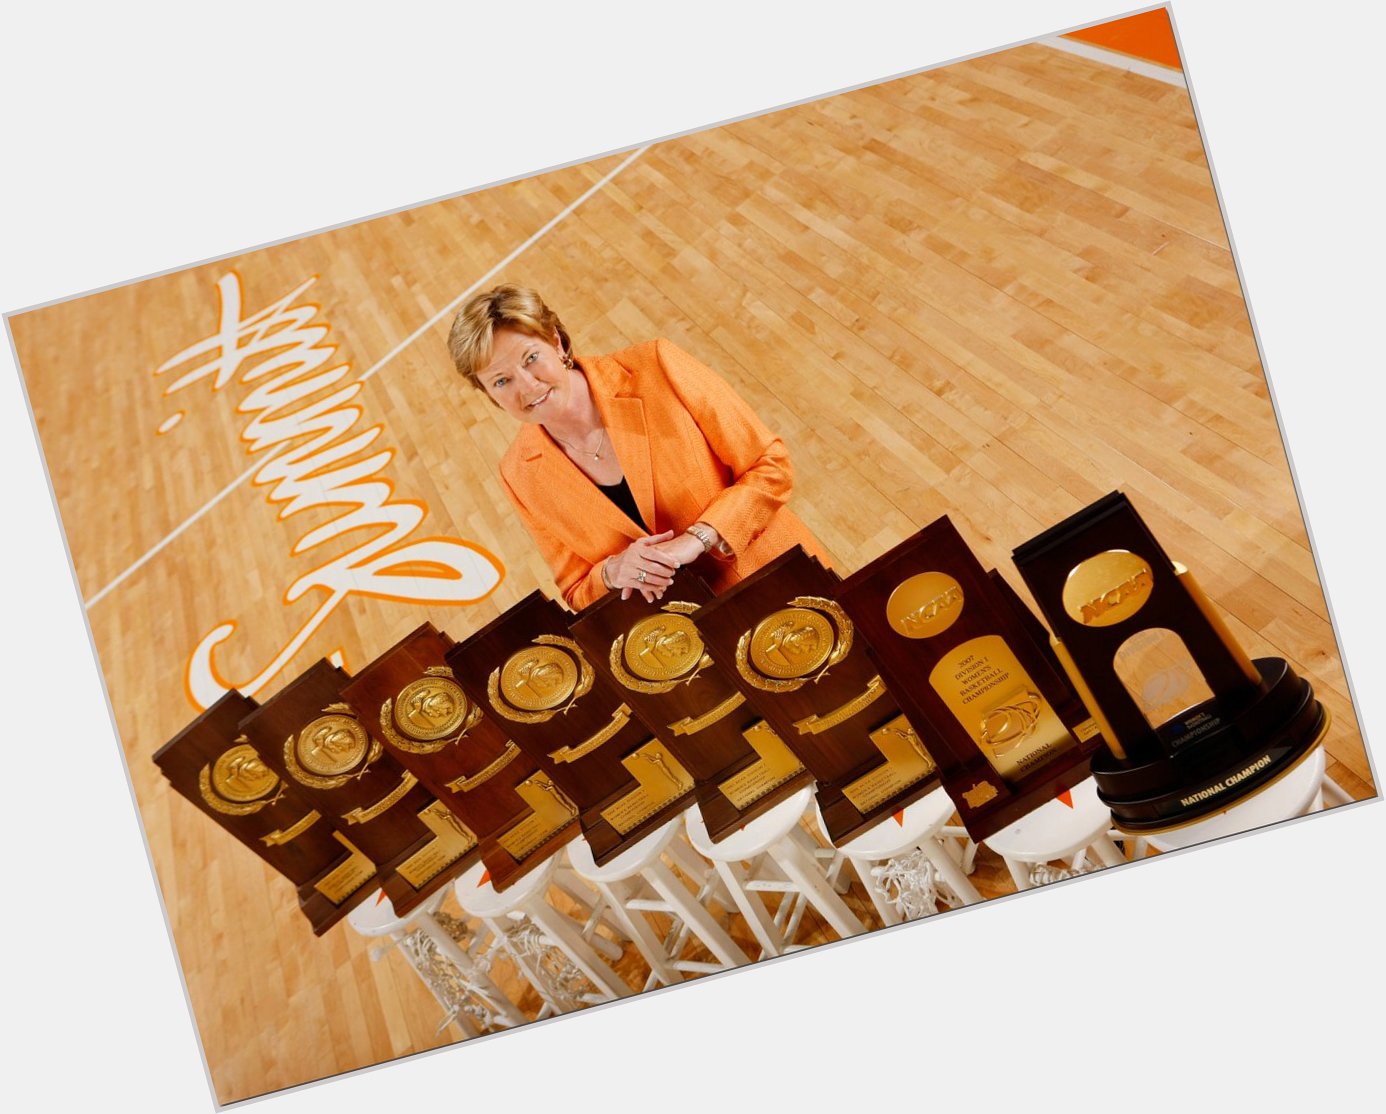 Happy birthday to the late, great Pat Summitt.

8 National Championships and a career win percentage of .841 